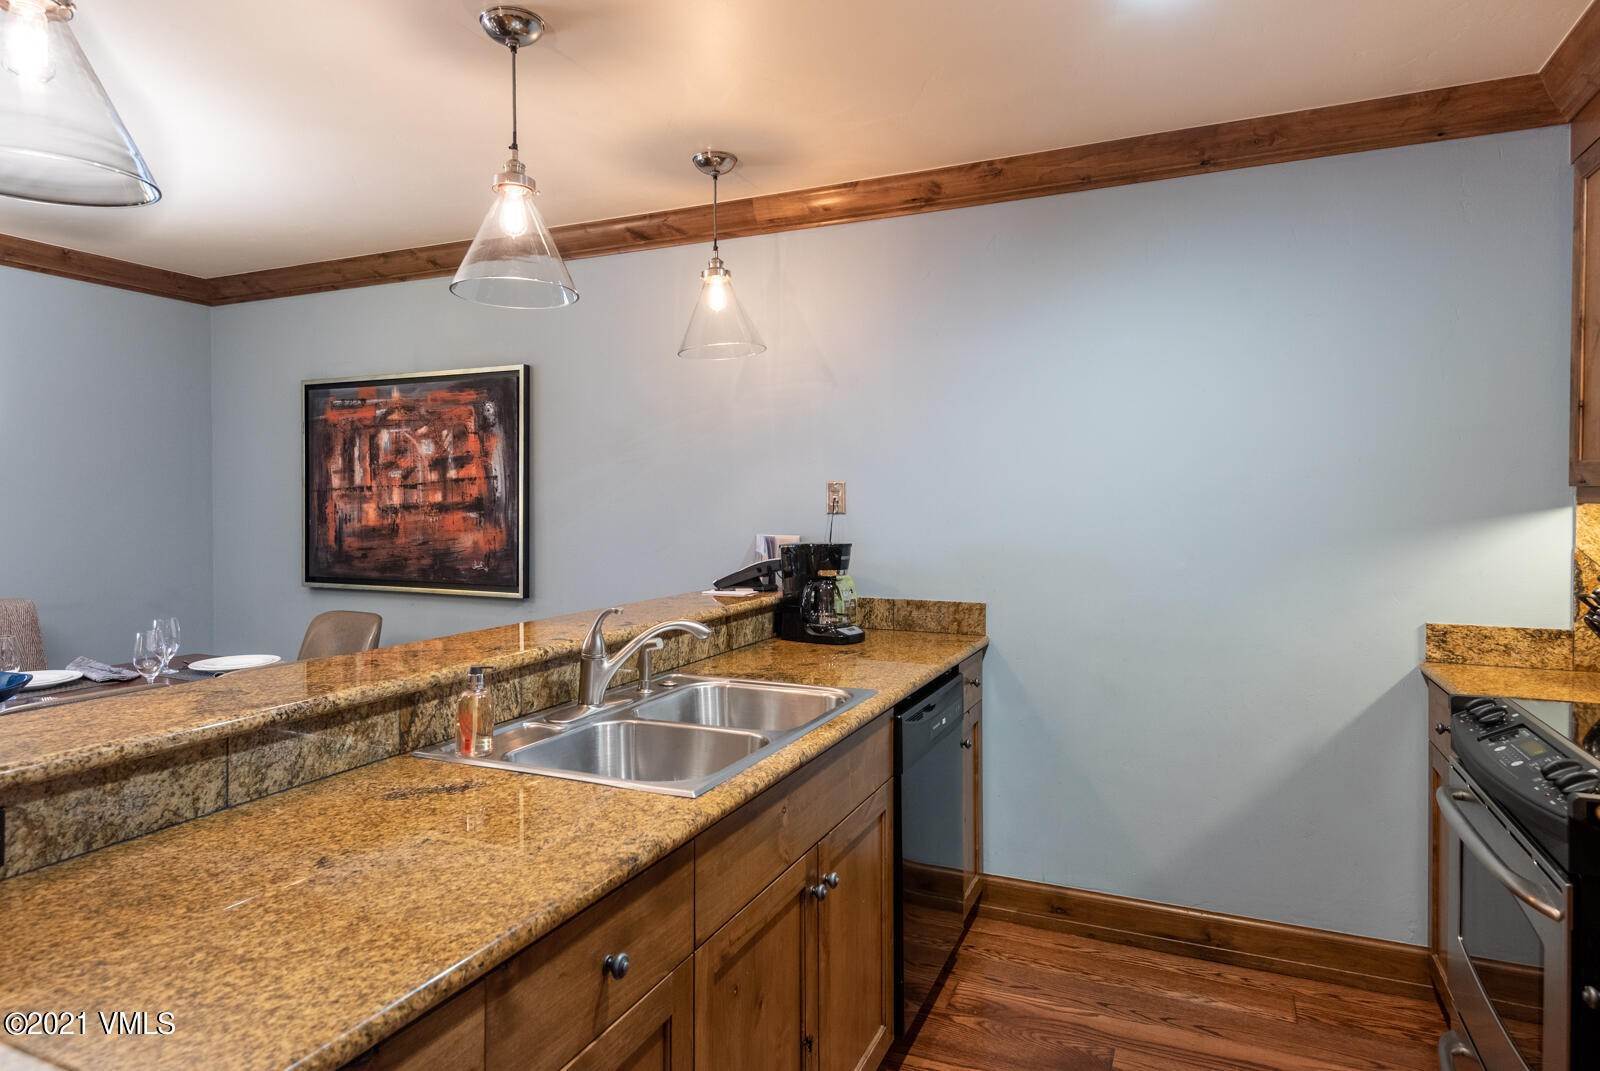 8. Fractional Ownership Property for Active at 16 Vail Road Vail, Colorado 81657 United States